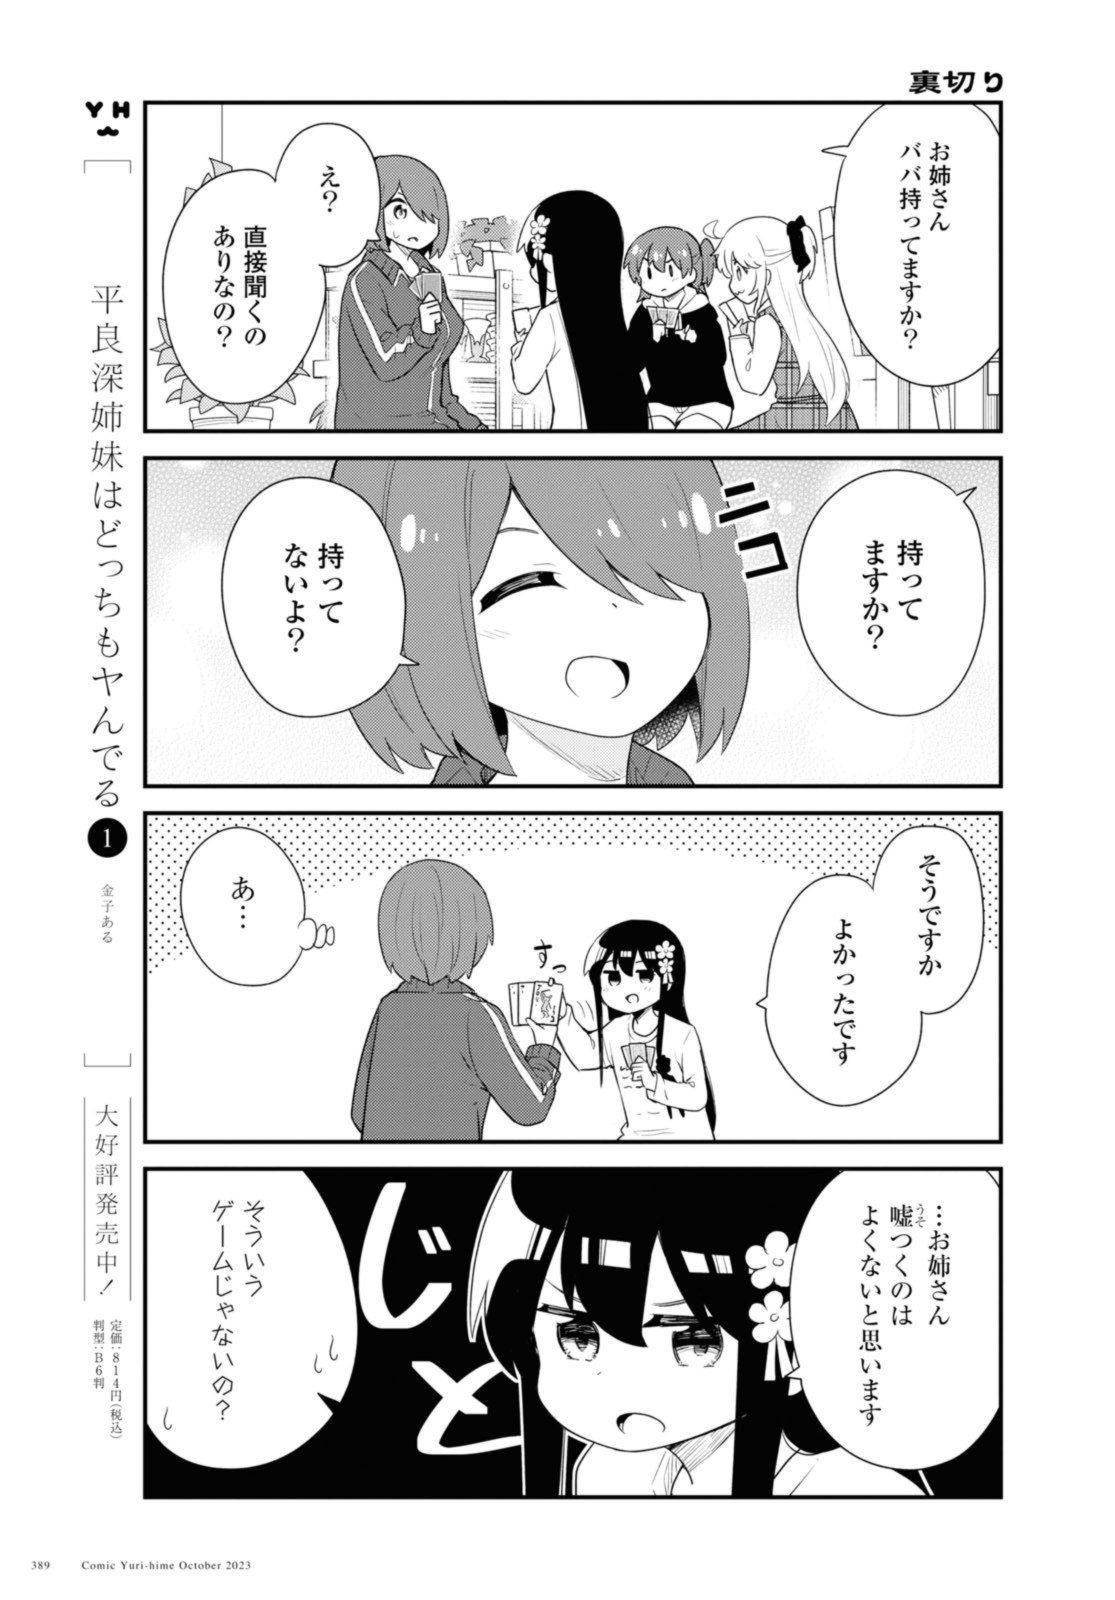 Wataten! An Angel Flew Down to Me 私に天使が舞い降りた！ 第109話 - Page 9